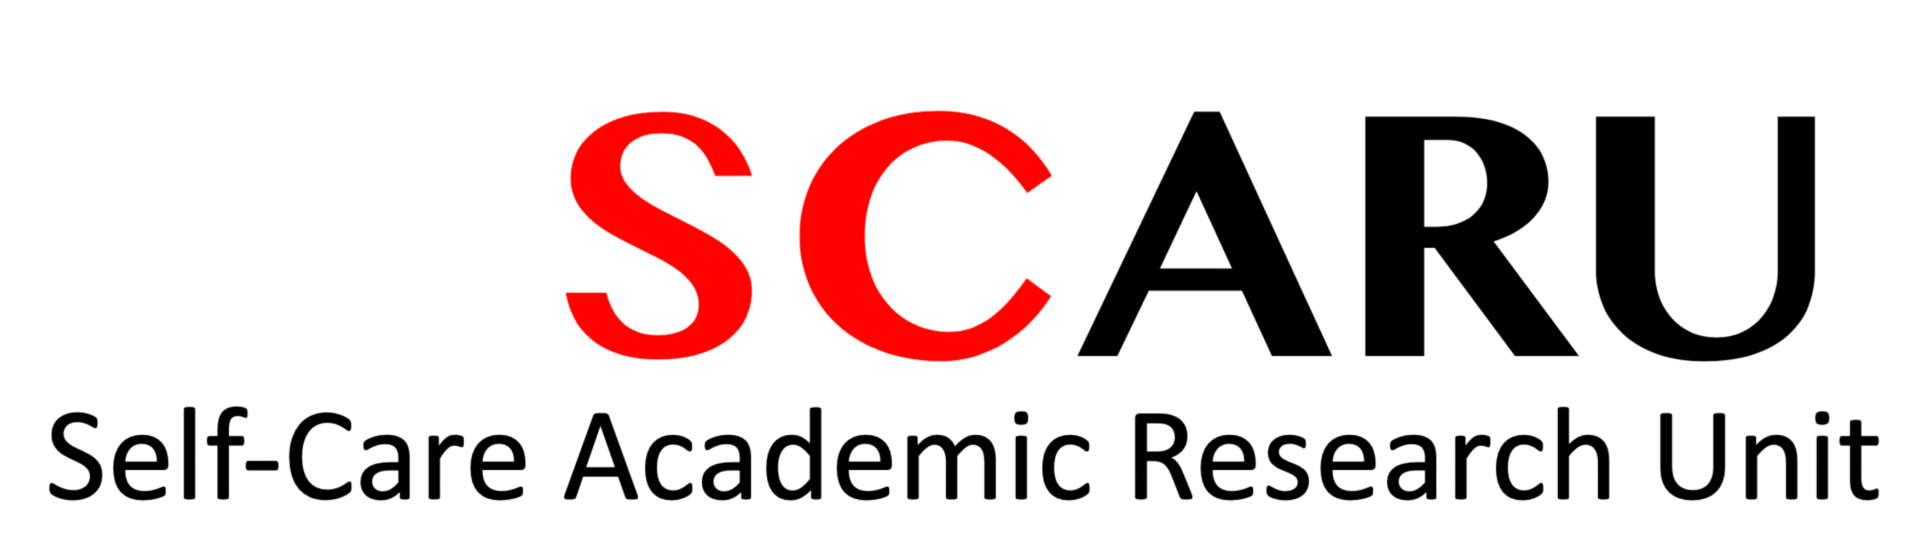 A red and black logo for the scad.